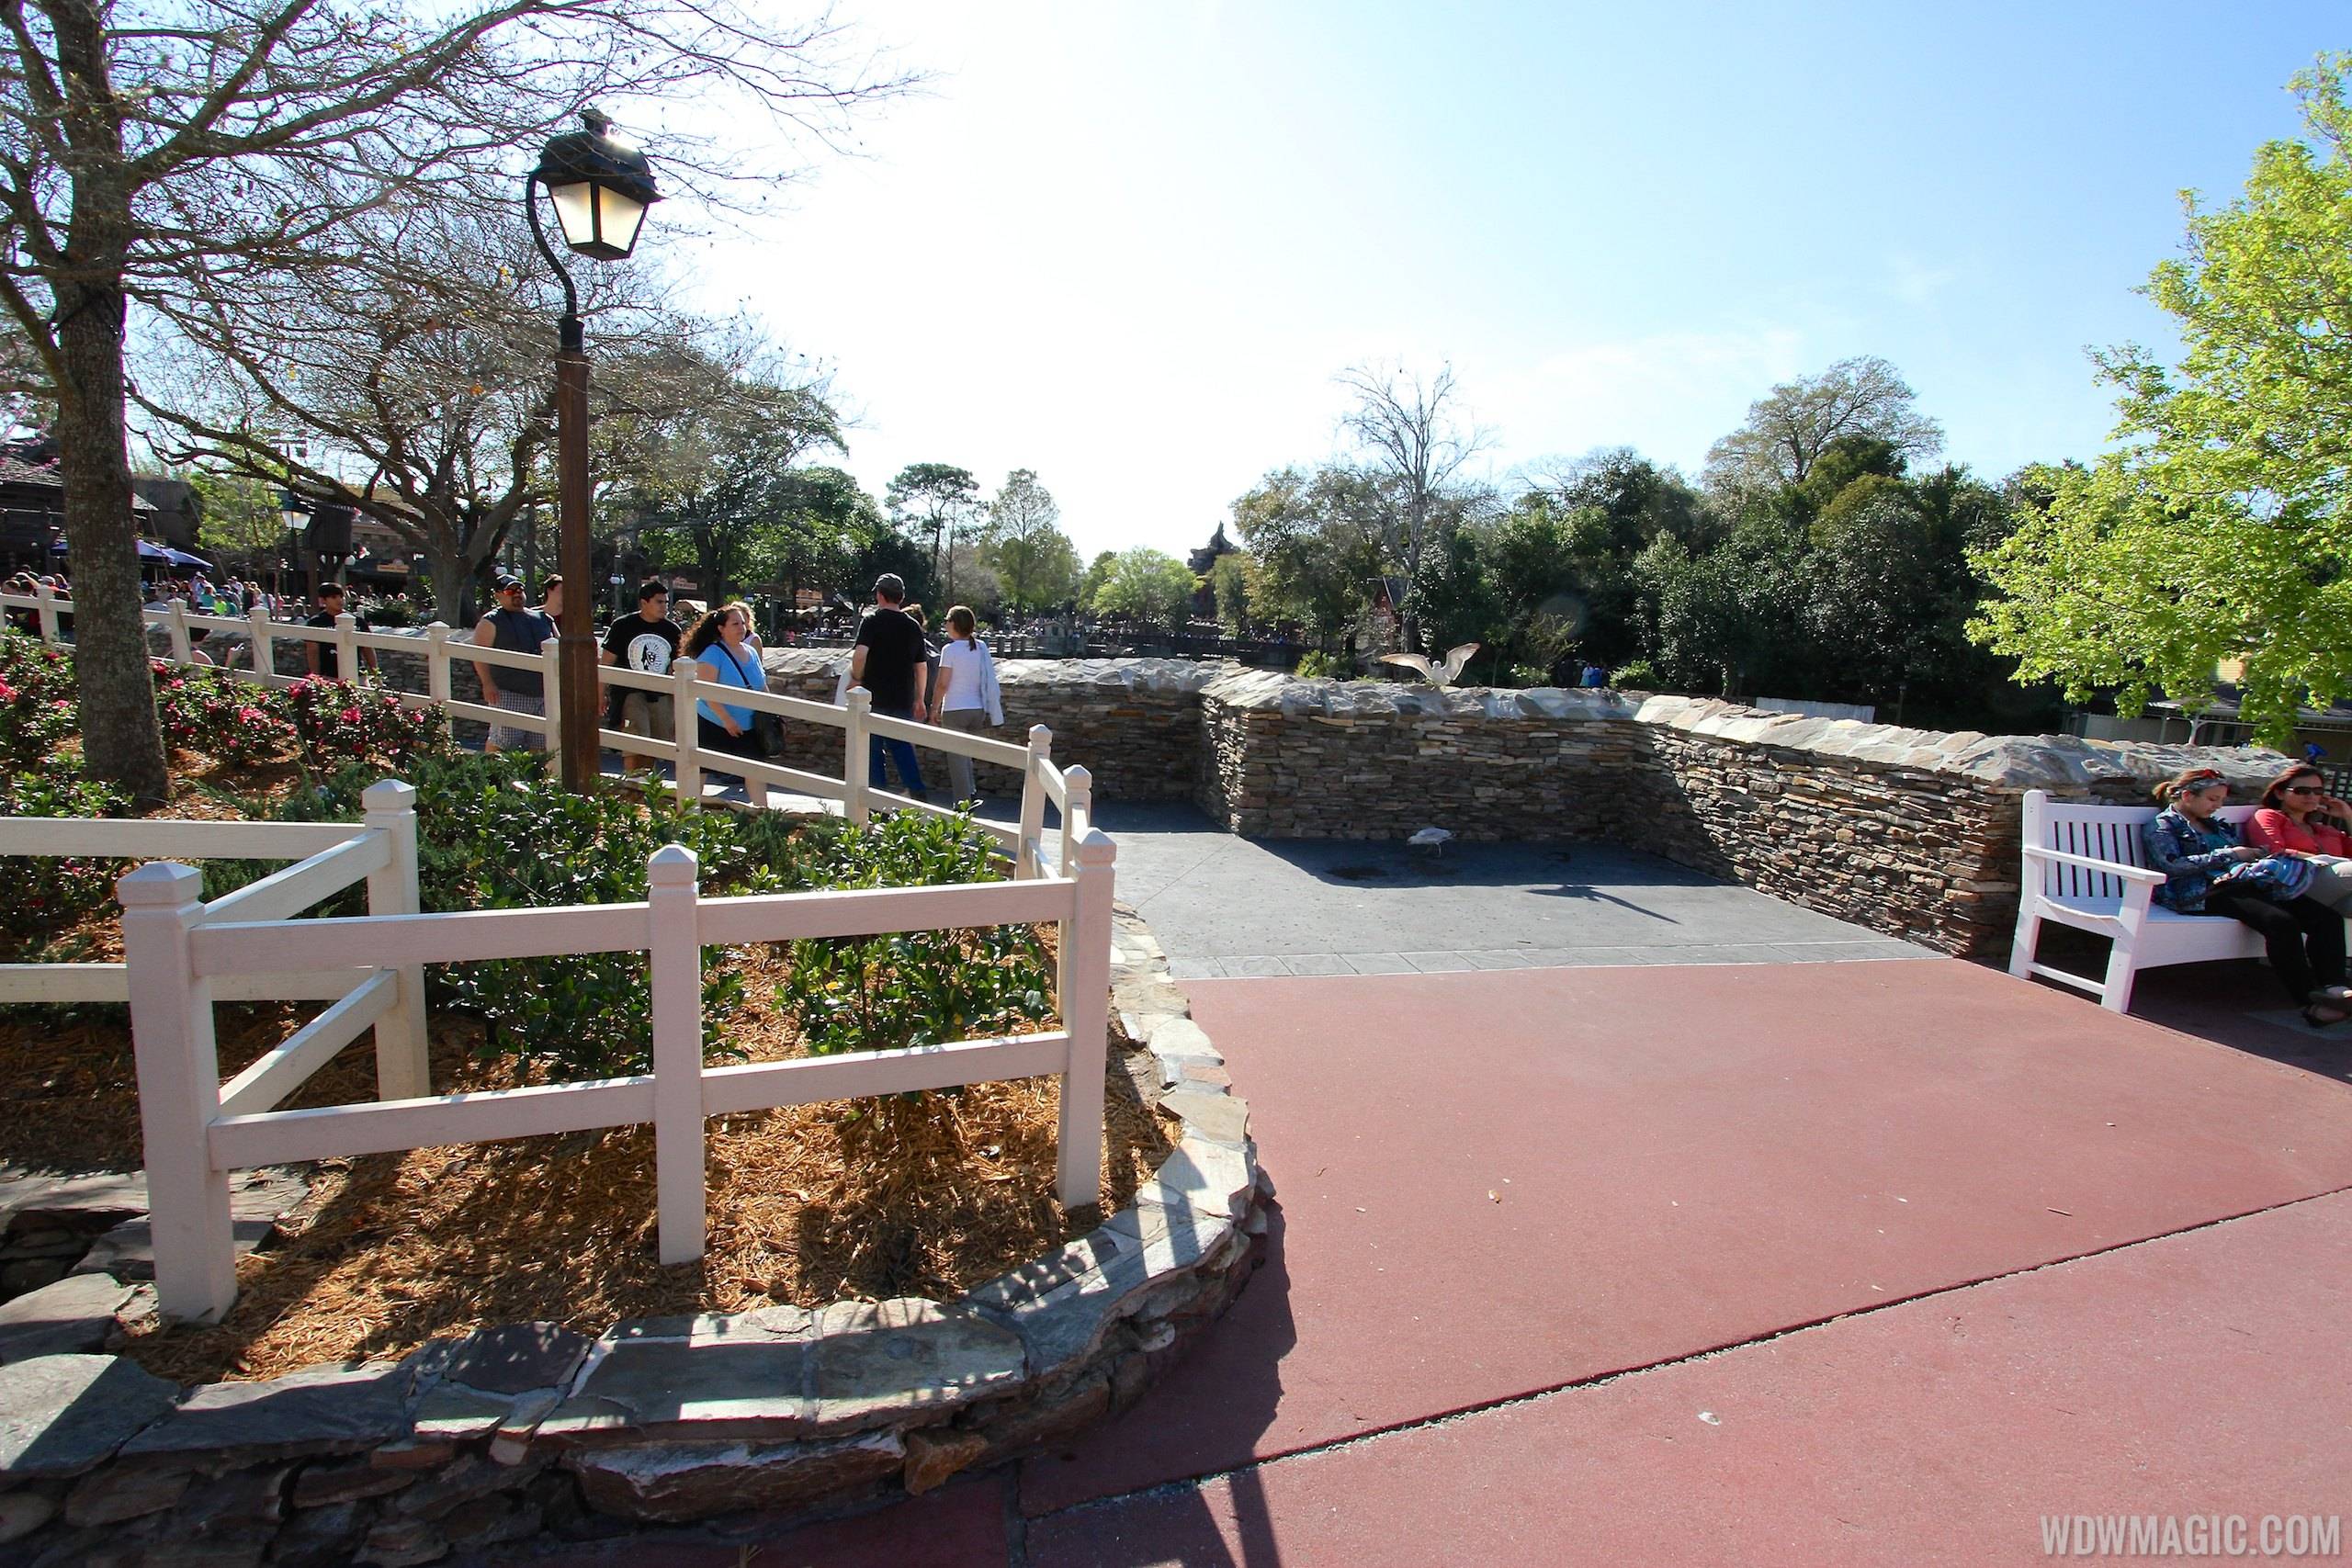 PHOTOS - New expanded Liberty Square walkway now open at the Magic Kingdom